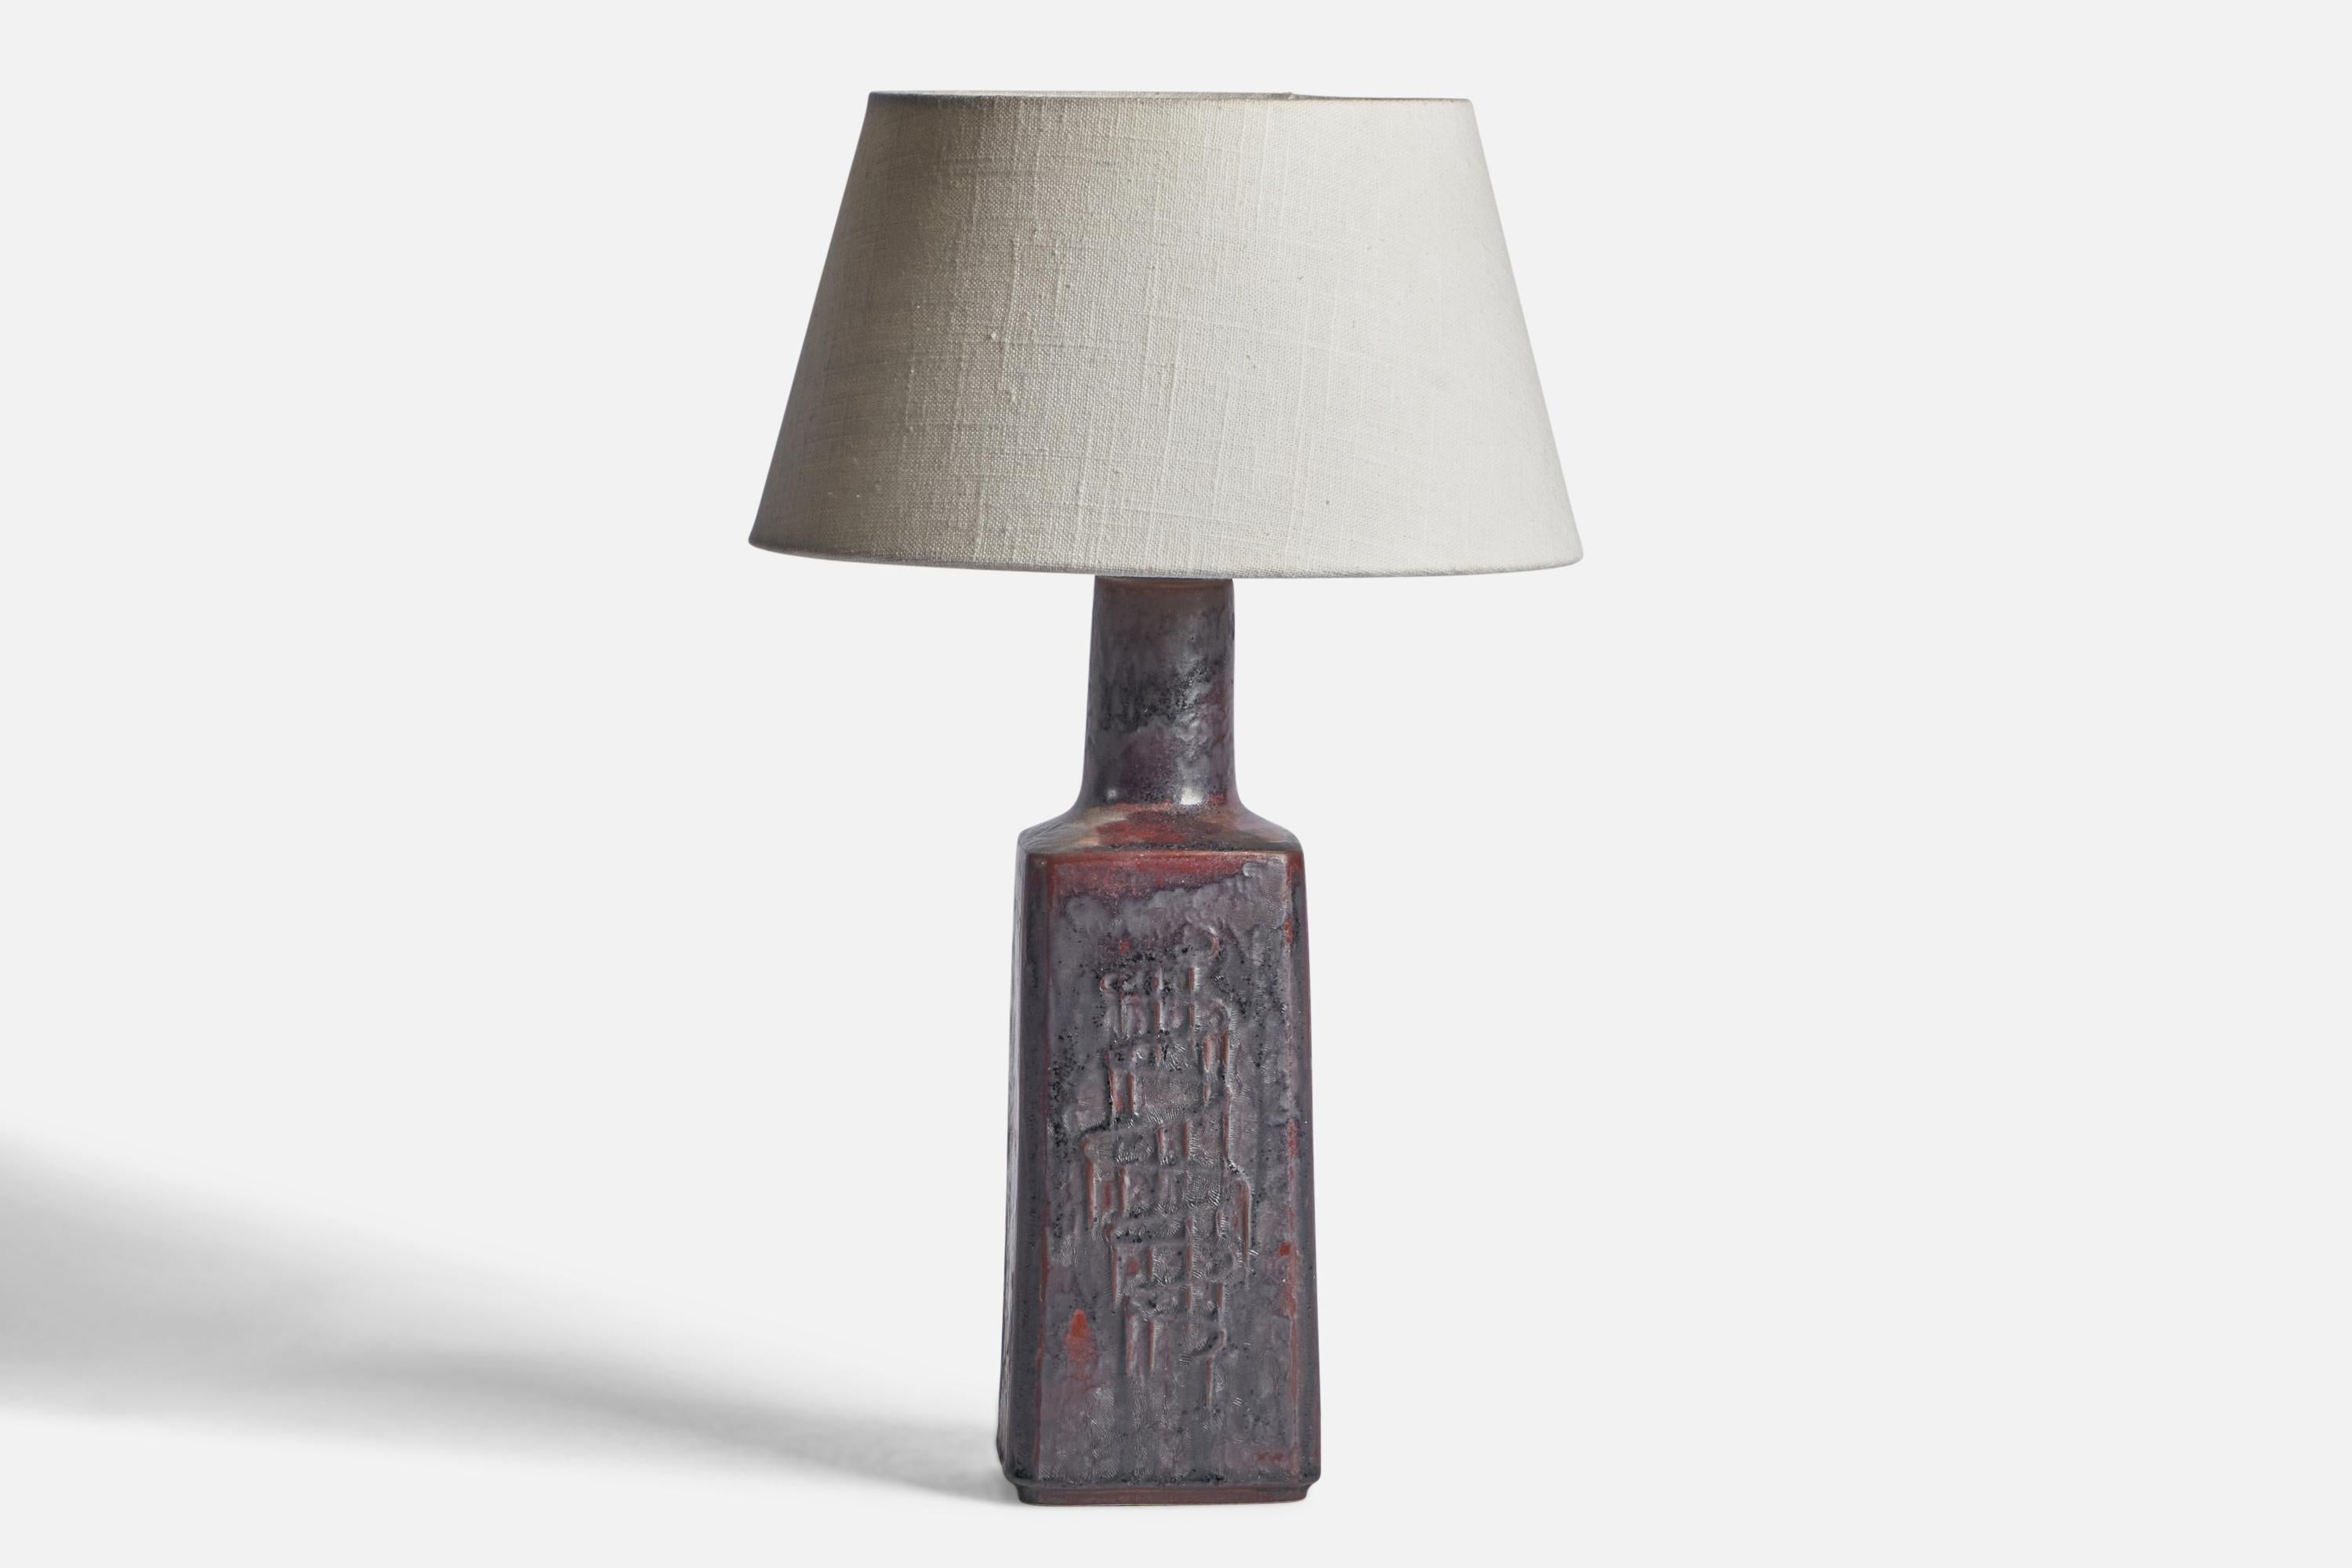 A black and red-glazed stoneware table lamp designed and produced by Desiree, Denmark, c. 1960s.

Dimensions of Lamp (inches): 14” H x 4” Diameter
Dimensions of Shade (inches): 7” Top Diameter x 10” Bottom Diameter x 5.5” H 
Dimensions of Lamp with